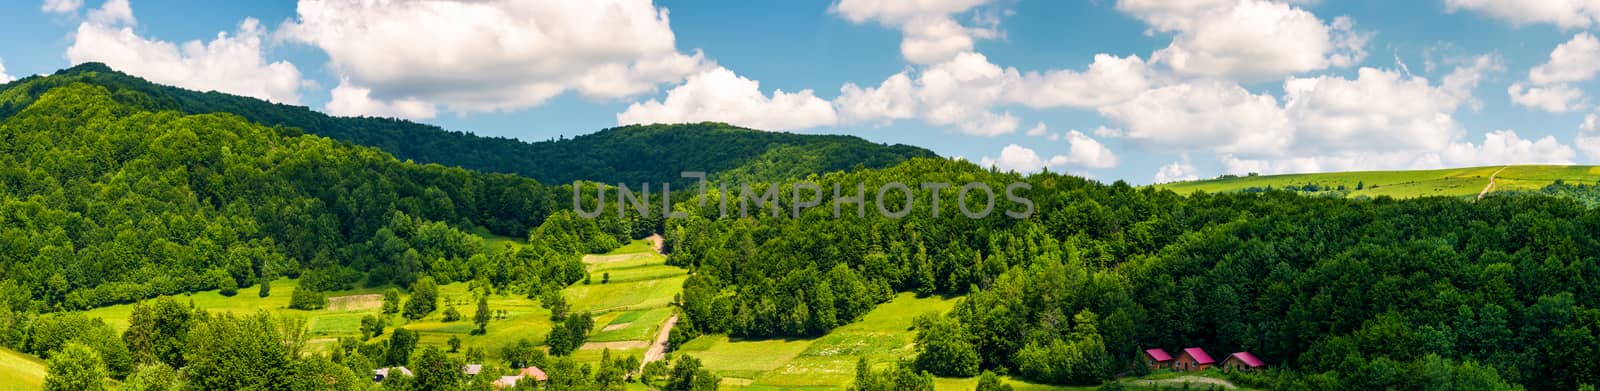 panorama of mountainous rural area in summer by Pellinni